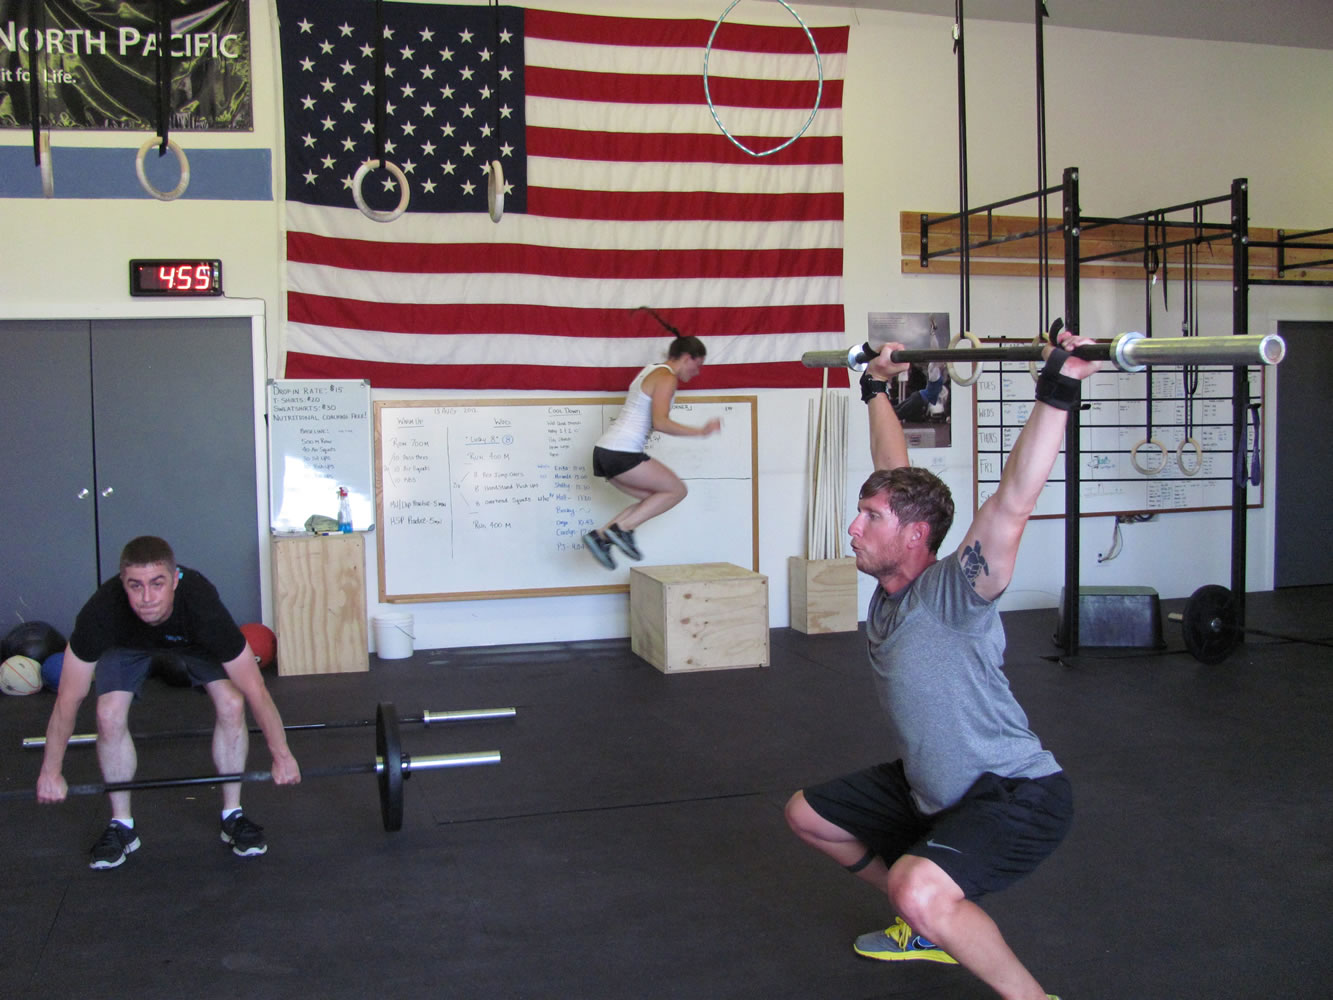 Individuals participate in a variety of weight lifting, gymnastics and cardio activities at CrossFit North Pacific, in Washougal.